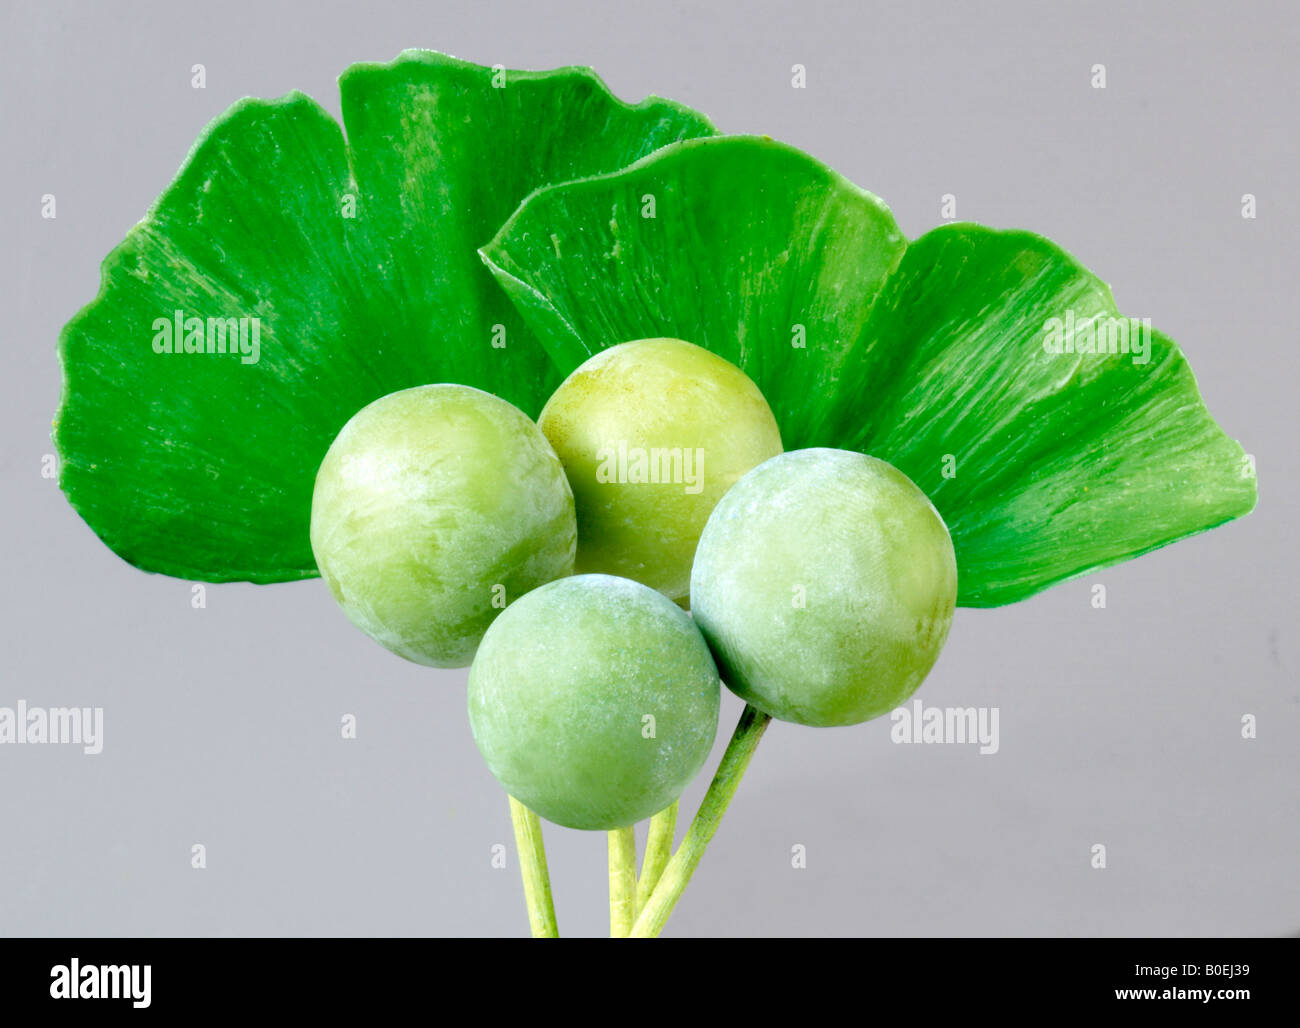 GINKGO BILOBA PLANT WITH LEAVES AND SEEDS Stock Photo